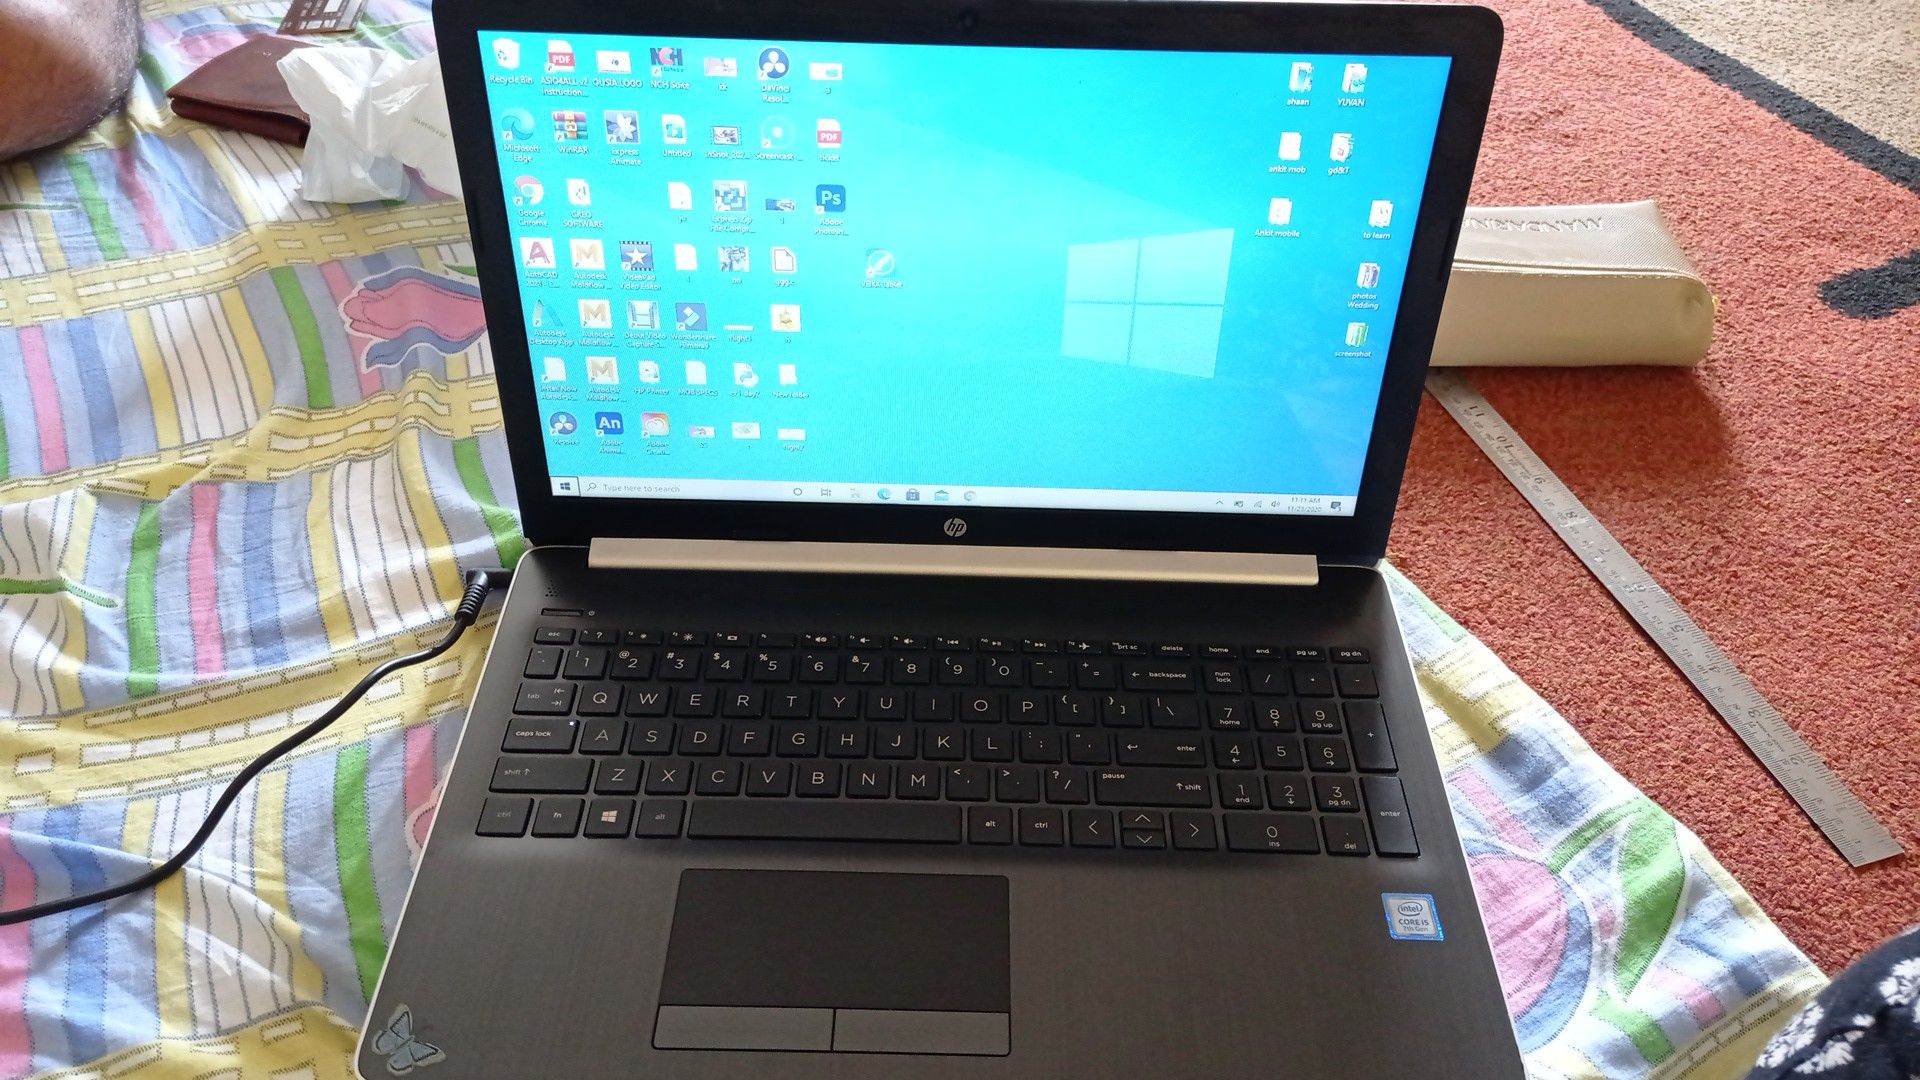 Touch screen HP laptop 2TB,8gb RAM,graphics card